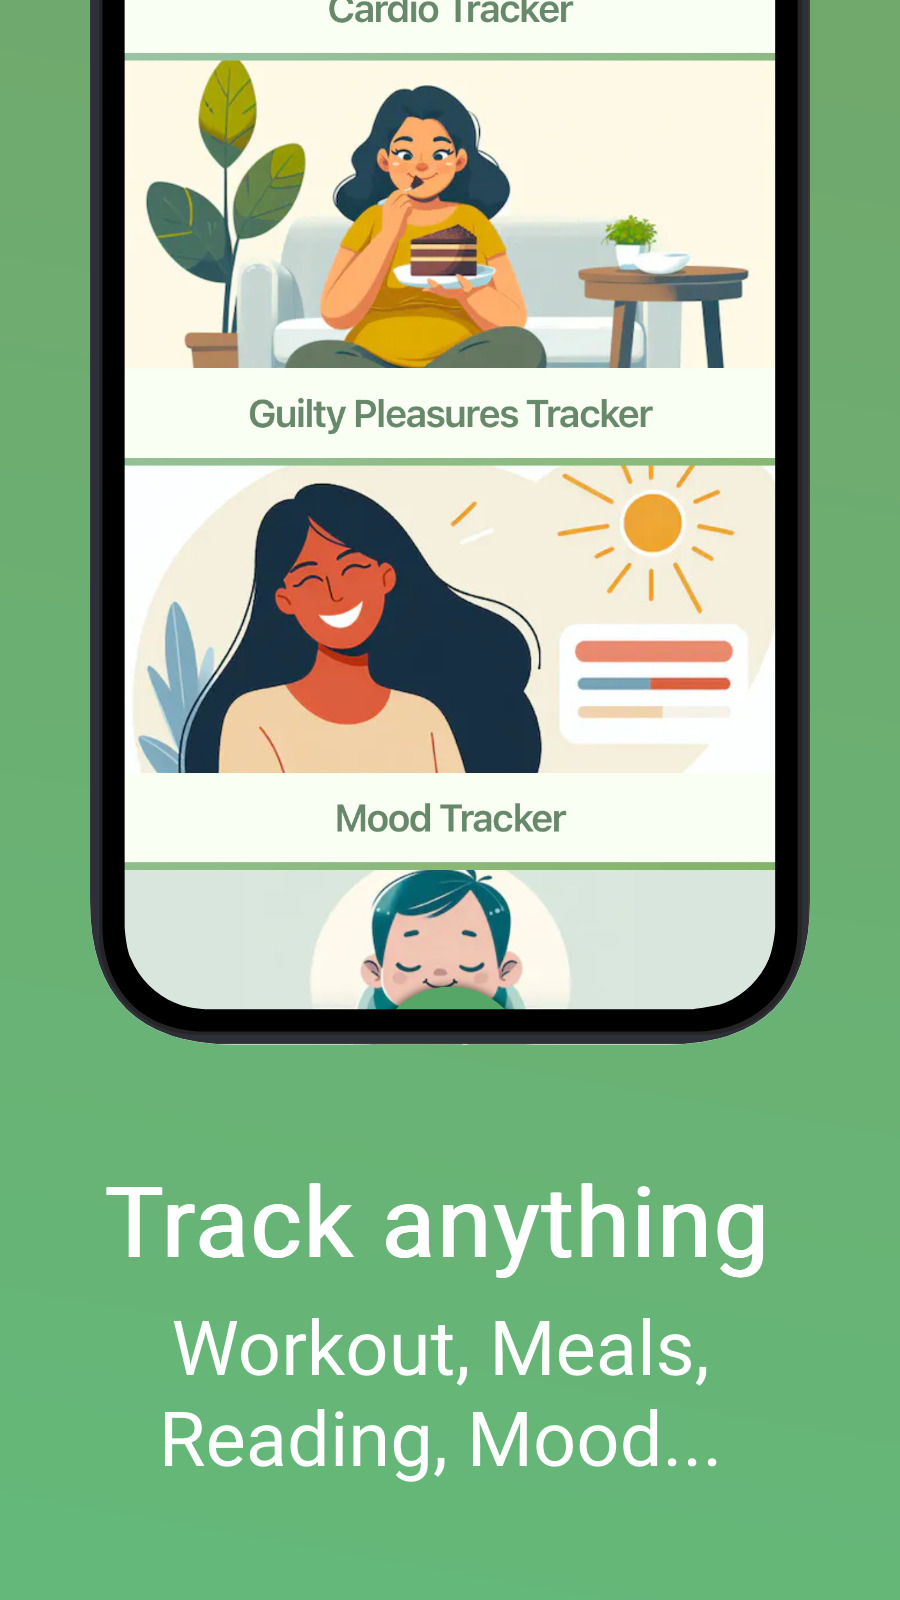 Track anything - Workout, Meals, Reading, Mood...